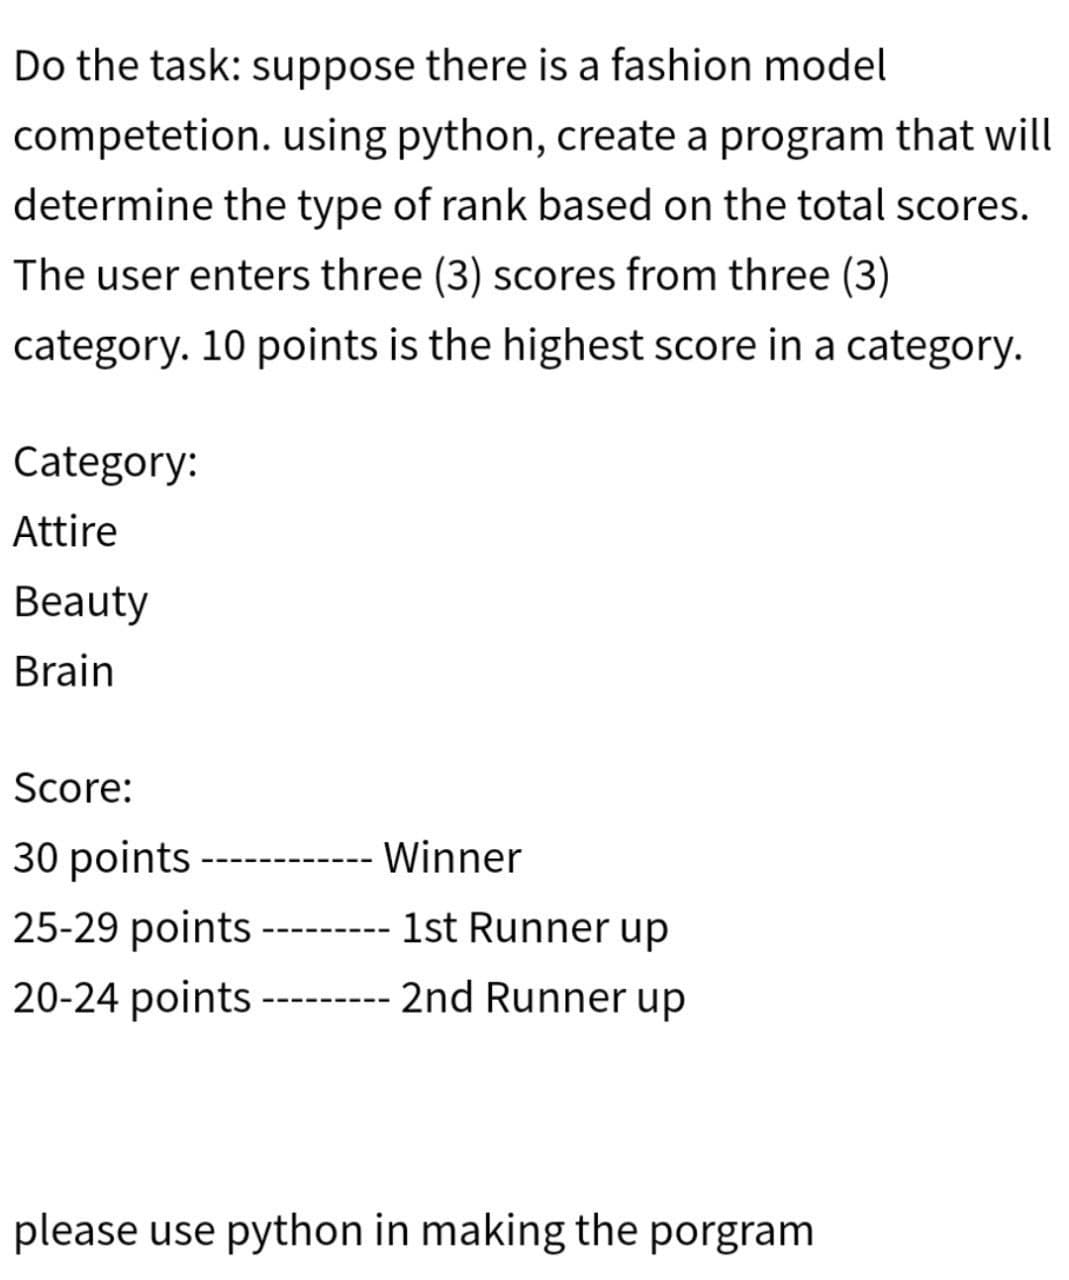 Do the task: suppose there is a fashion model
competetion. using python, create a program that will
determine the type of rank based on the total scores.
The user enters three (3) scores from three (3)
category. 10 points is the highest score in a category.
Category:
Attire
Beauty
Brain
Score:
30 points
25-29 points
20-24 points
Winner
1st Runner up
2nd Runner up
‒‒‒‒‒‒‒‒
please use python in making the porgram